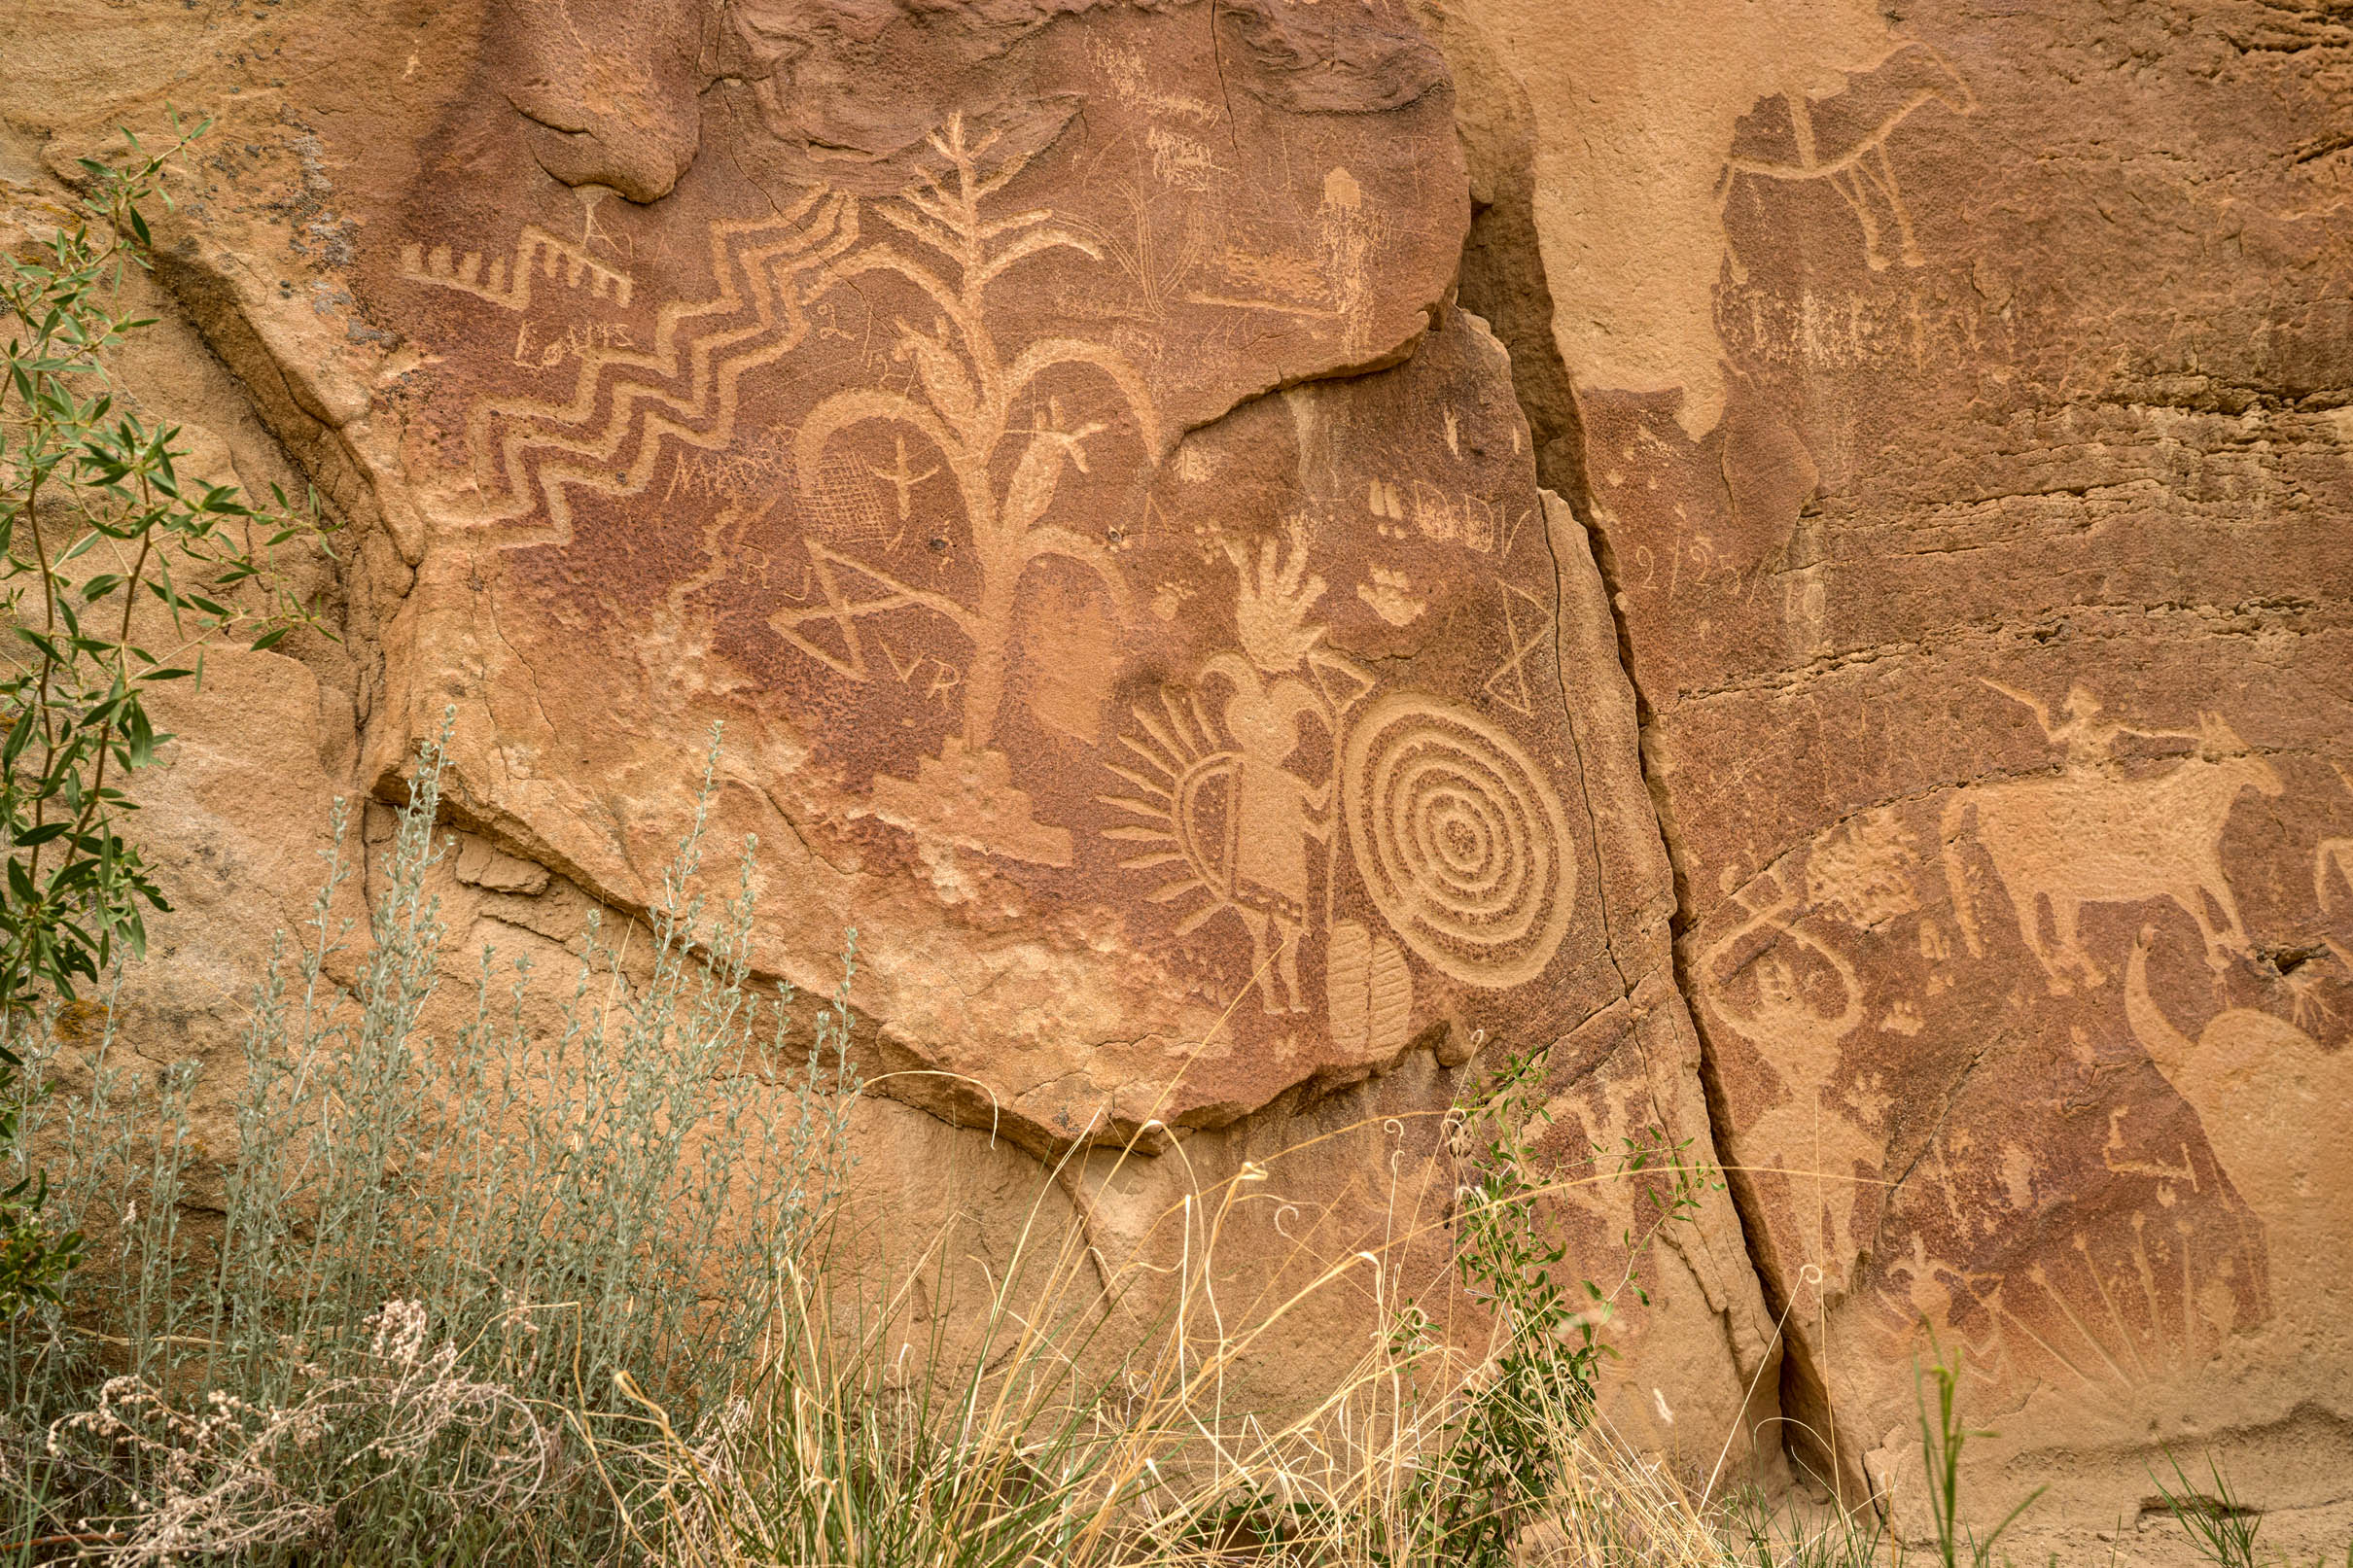 Petroglyph panel showing reddish sandstone wall with lighter tan petroglyps carved into it. Large corn figure on left and other human-like figures including person on horseback on right.